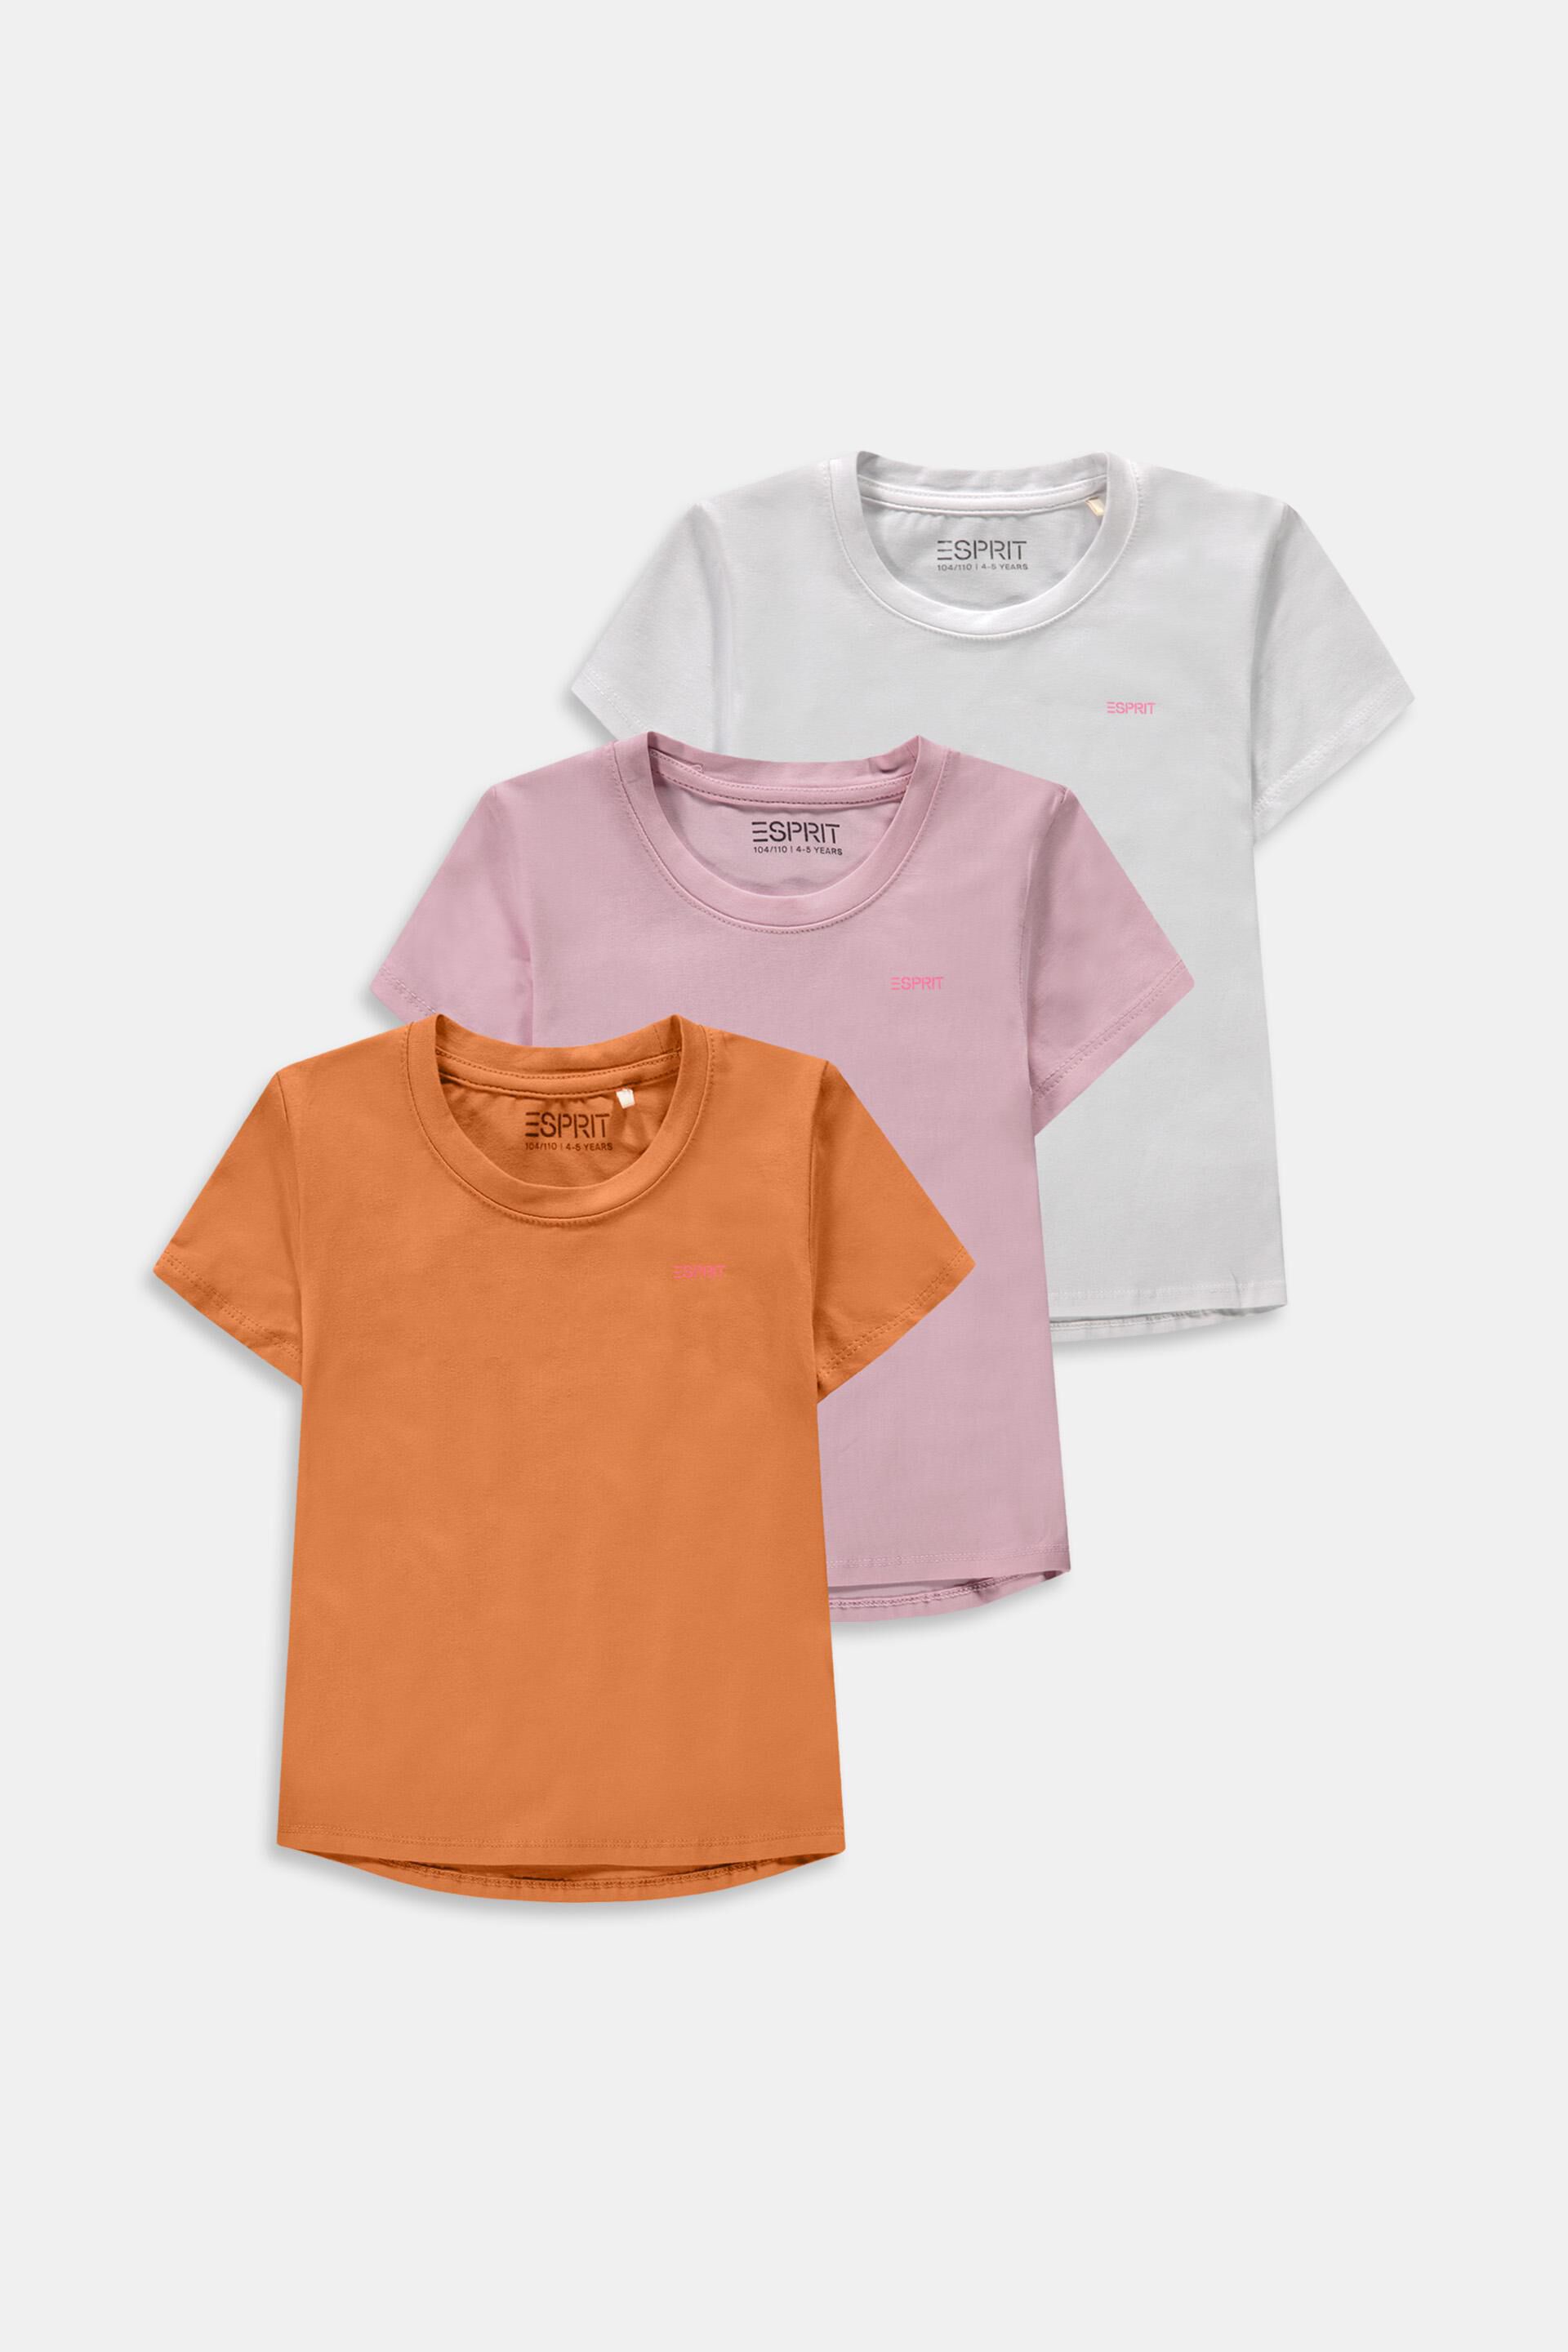 Esprit 3-pack of logo print t-shirts small